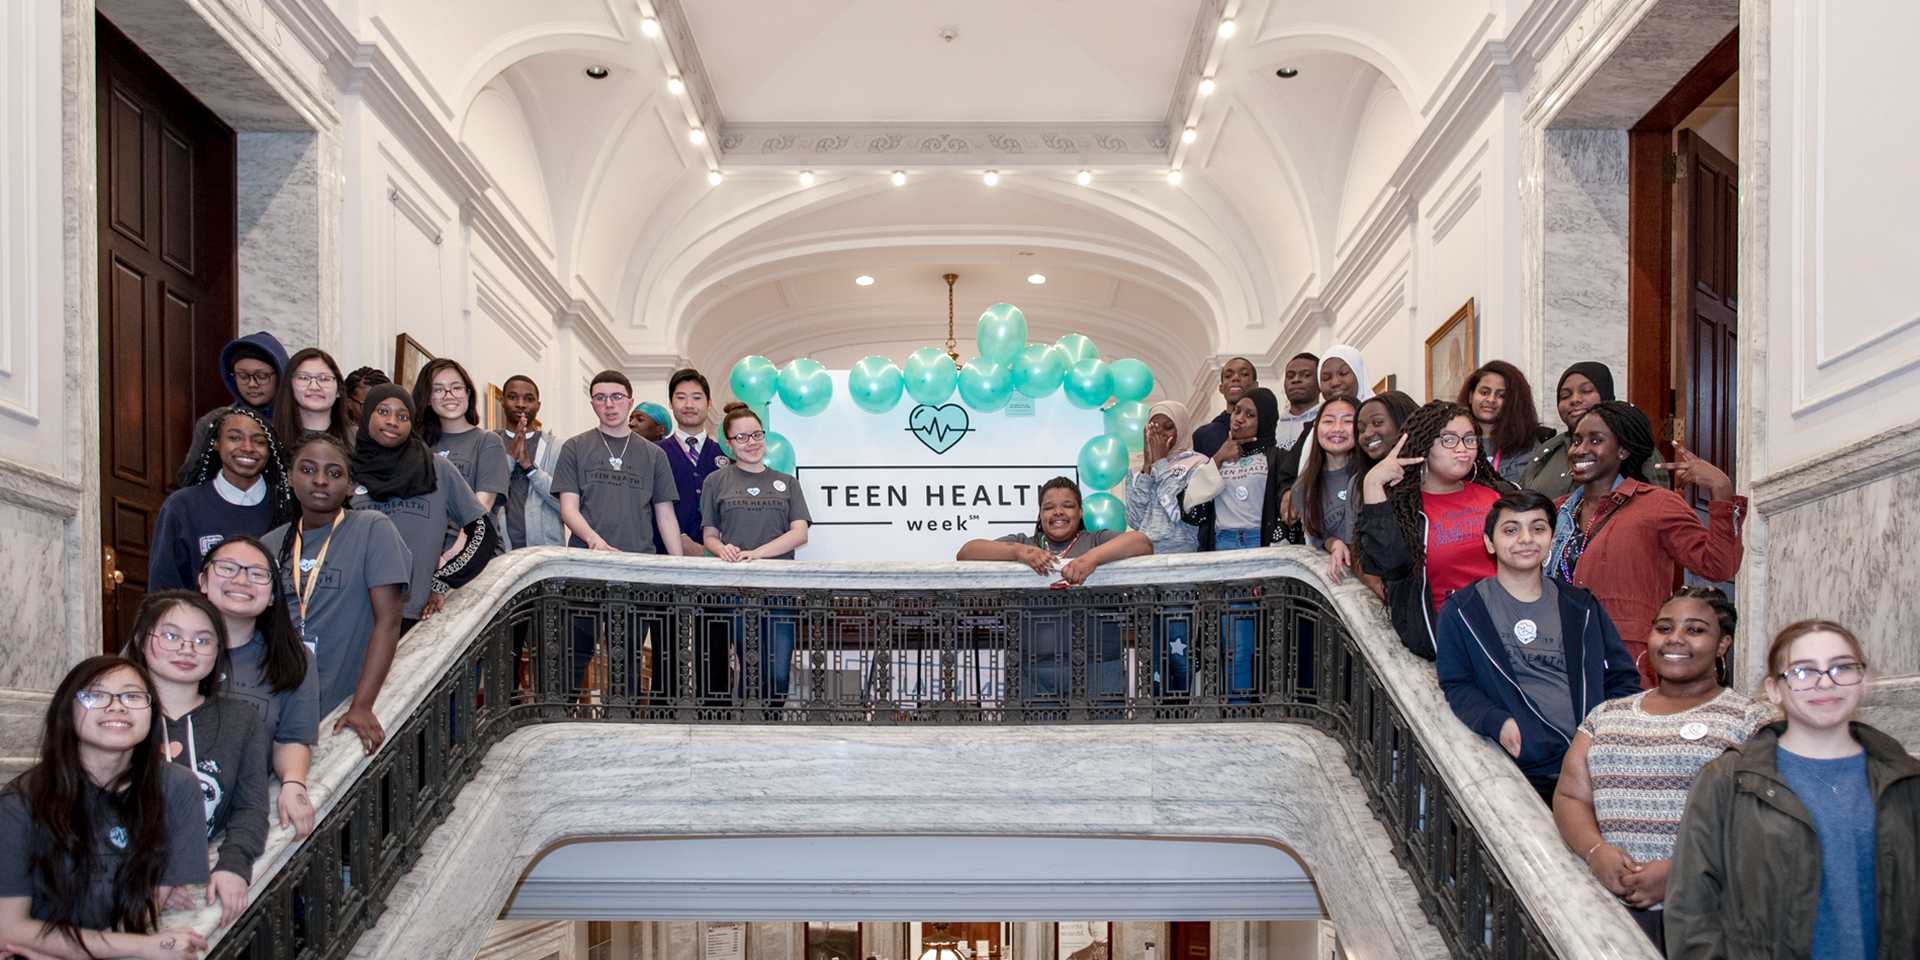 Group of teens standing around a poster that says "Teen Health Week"